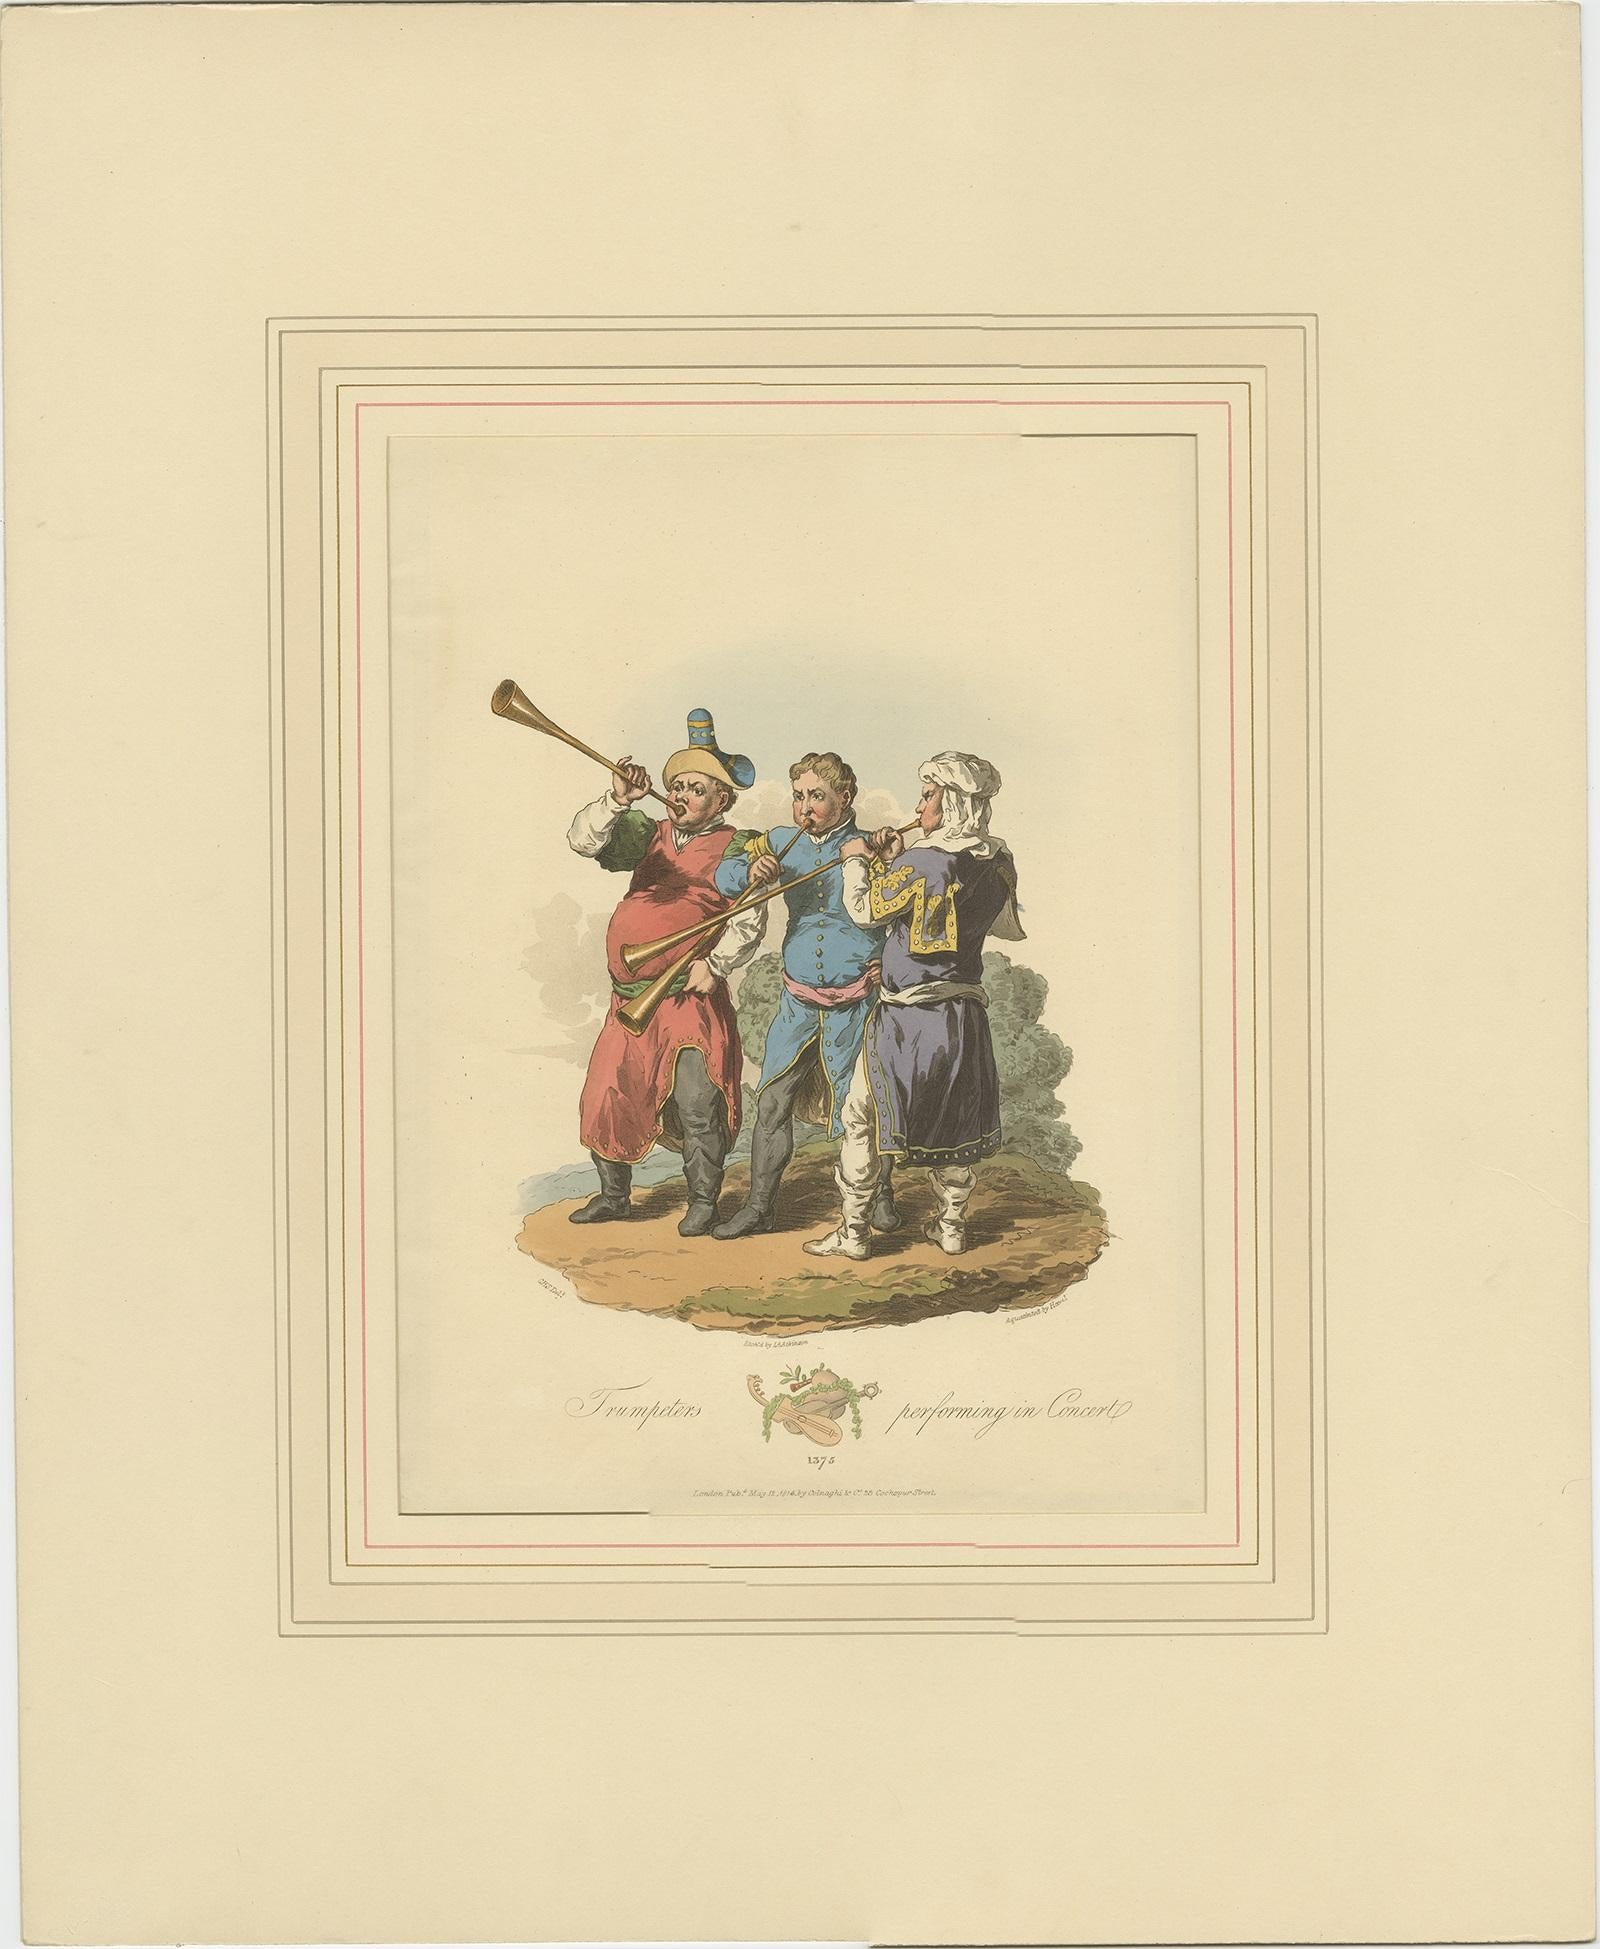 19th Century Antique Print of Trumpeters by Atkinson '1814' For Sale